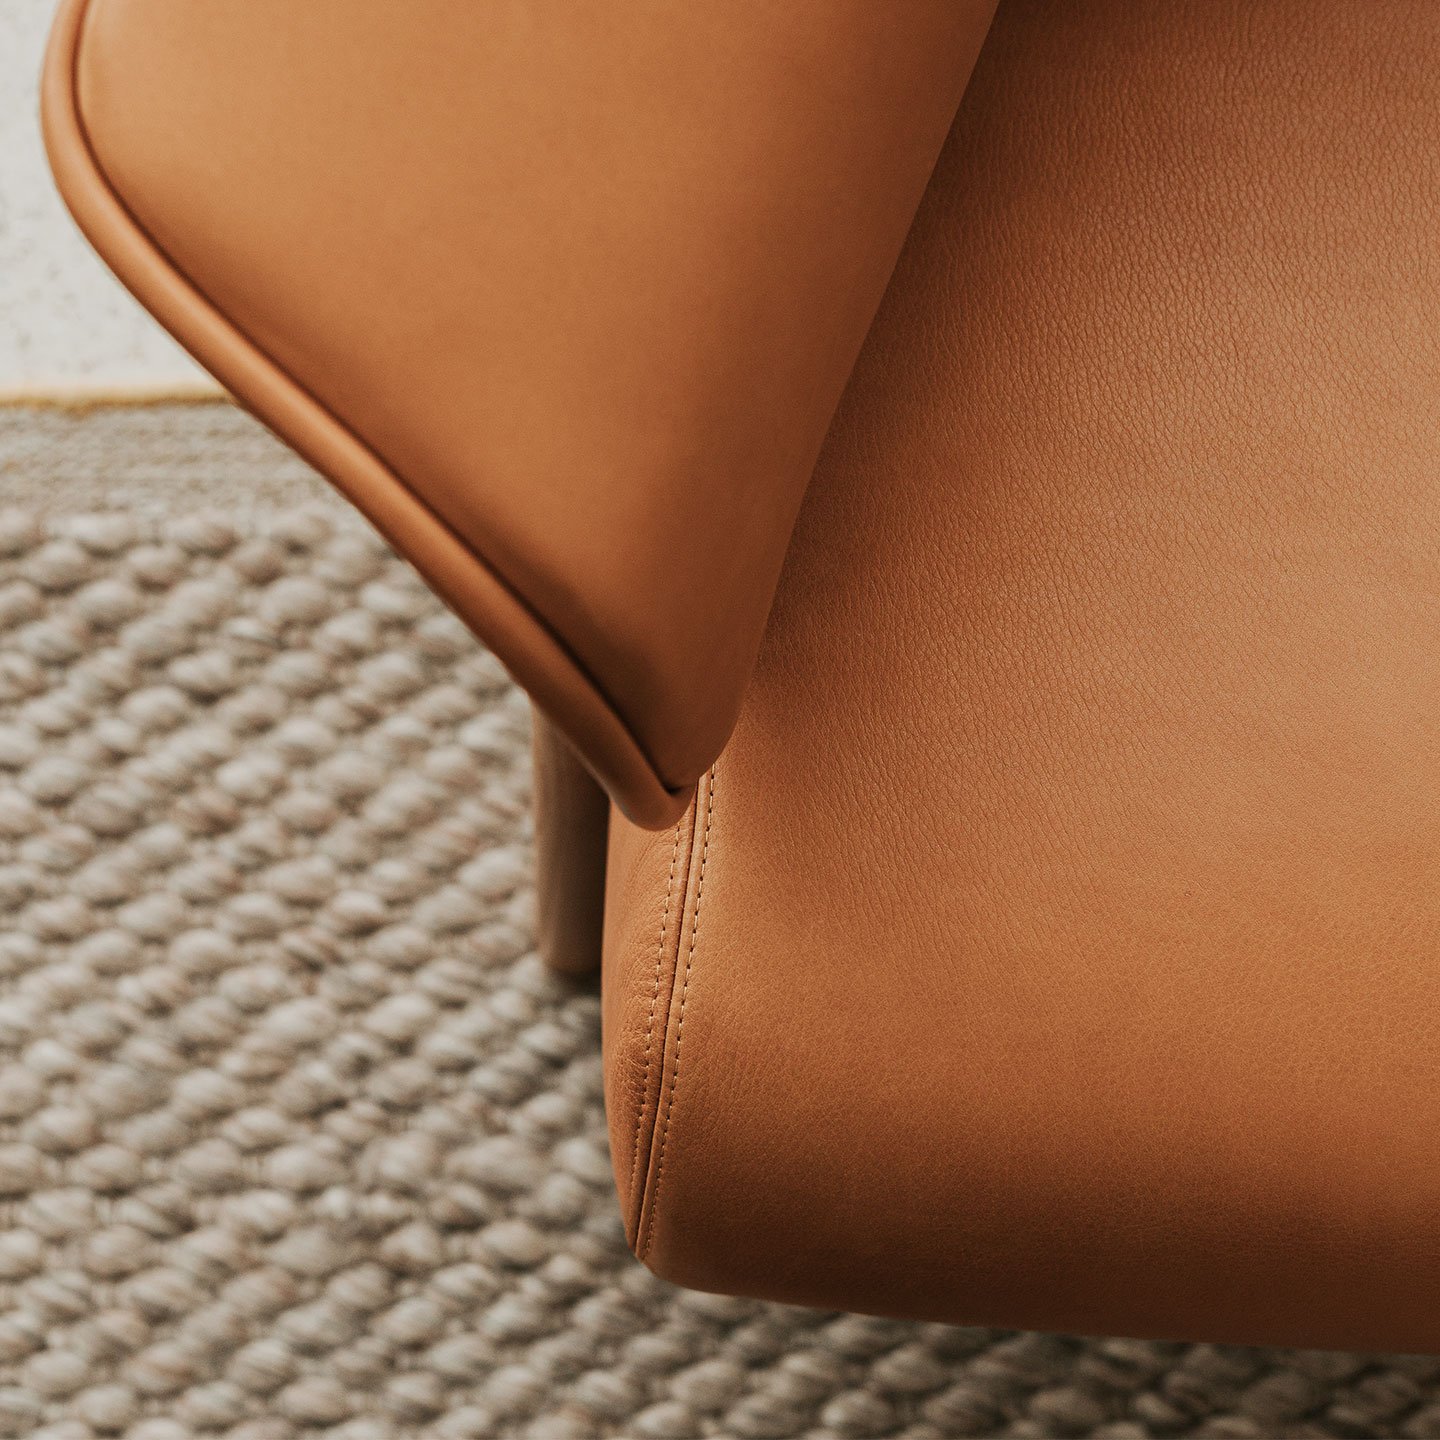 Haworth Back Wing chair in tan leather focusing on the armrest